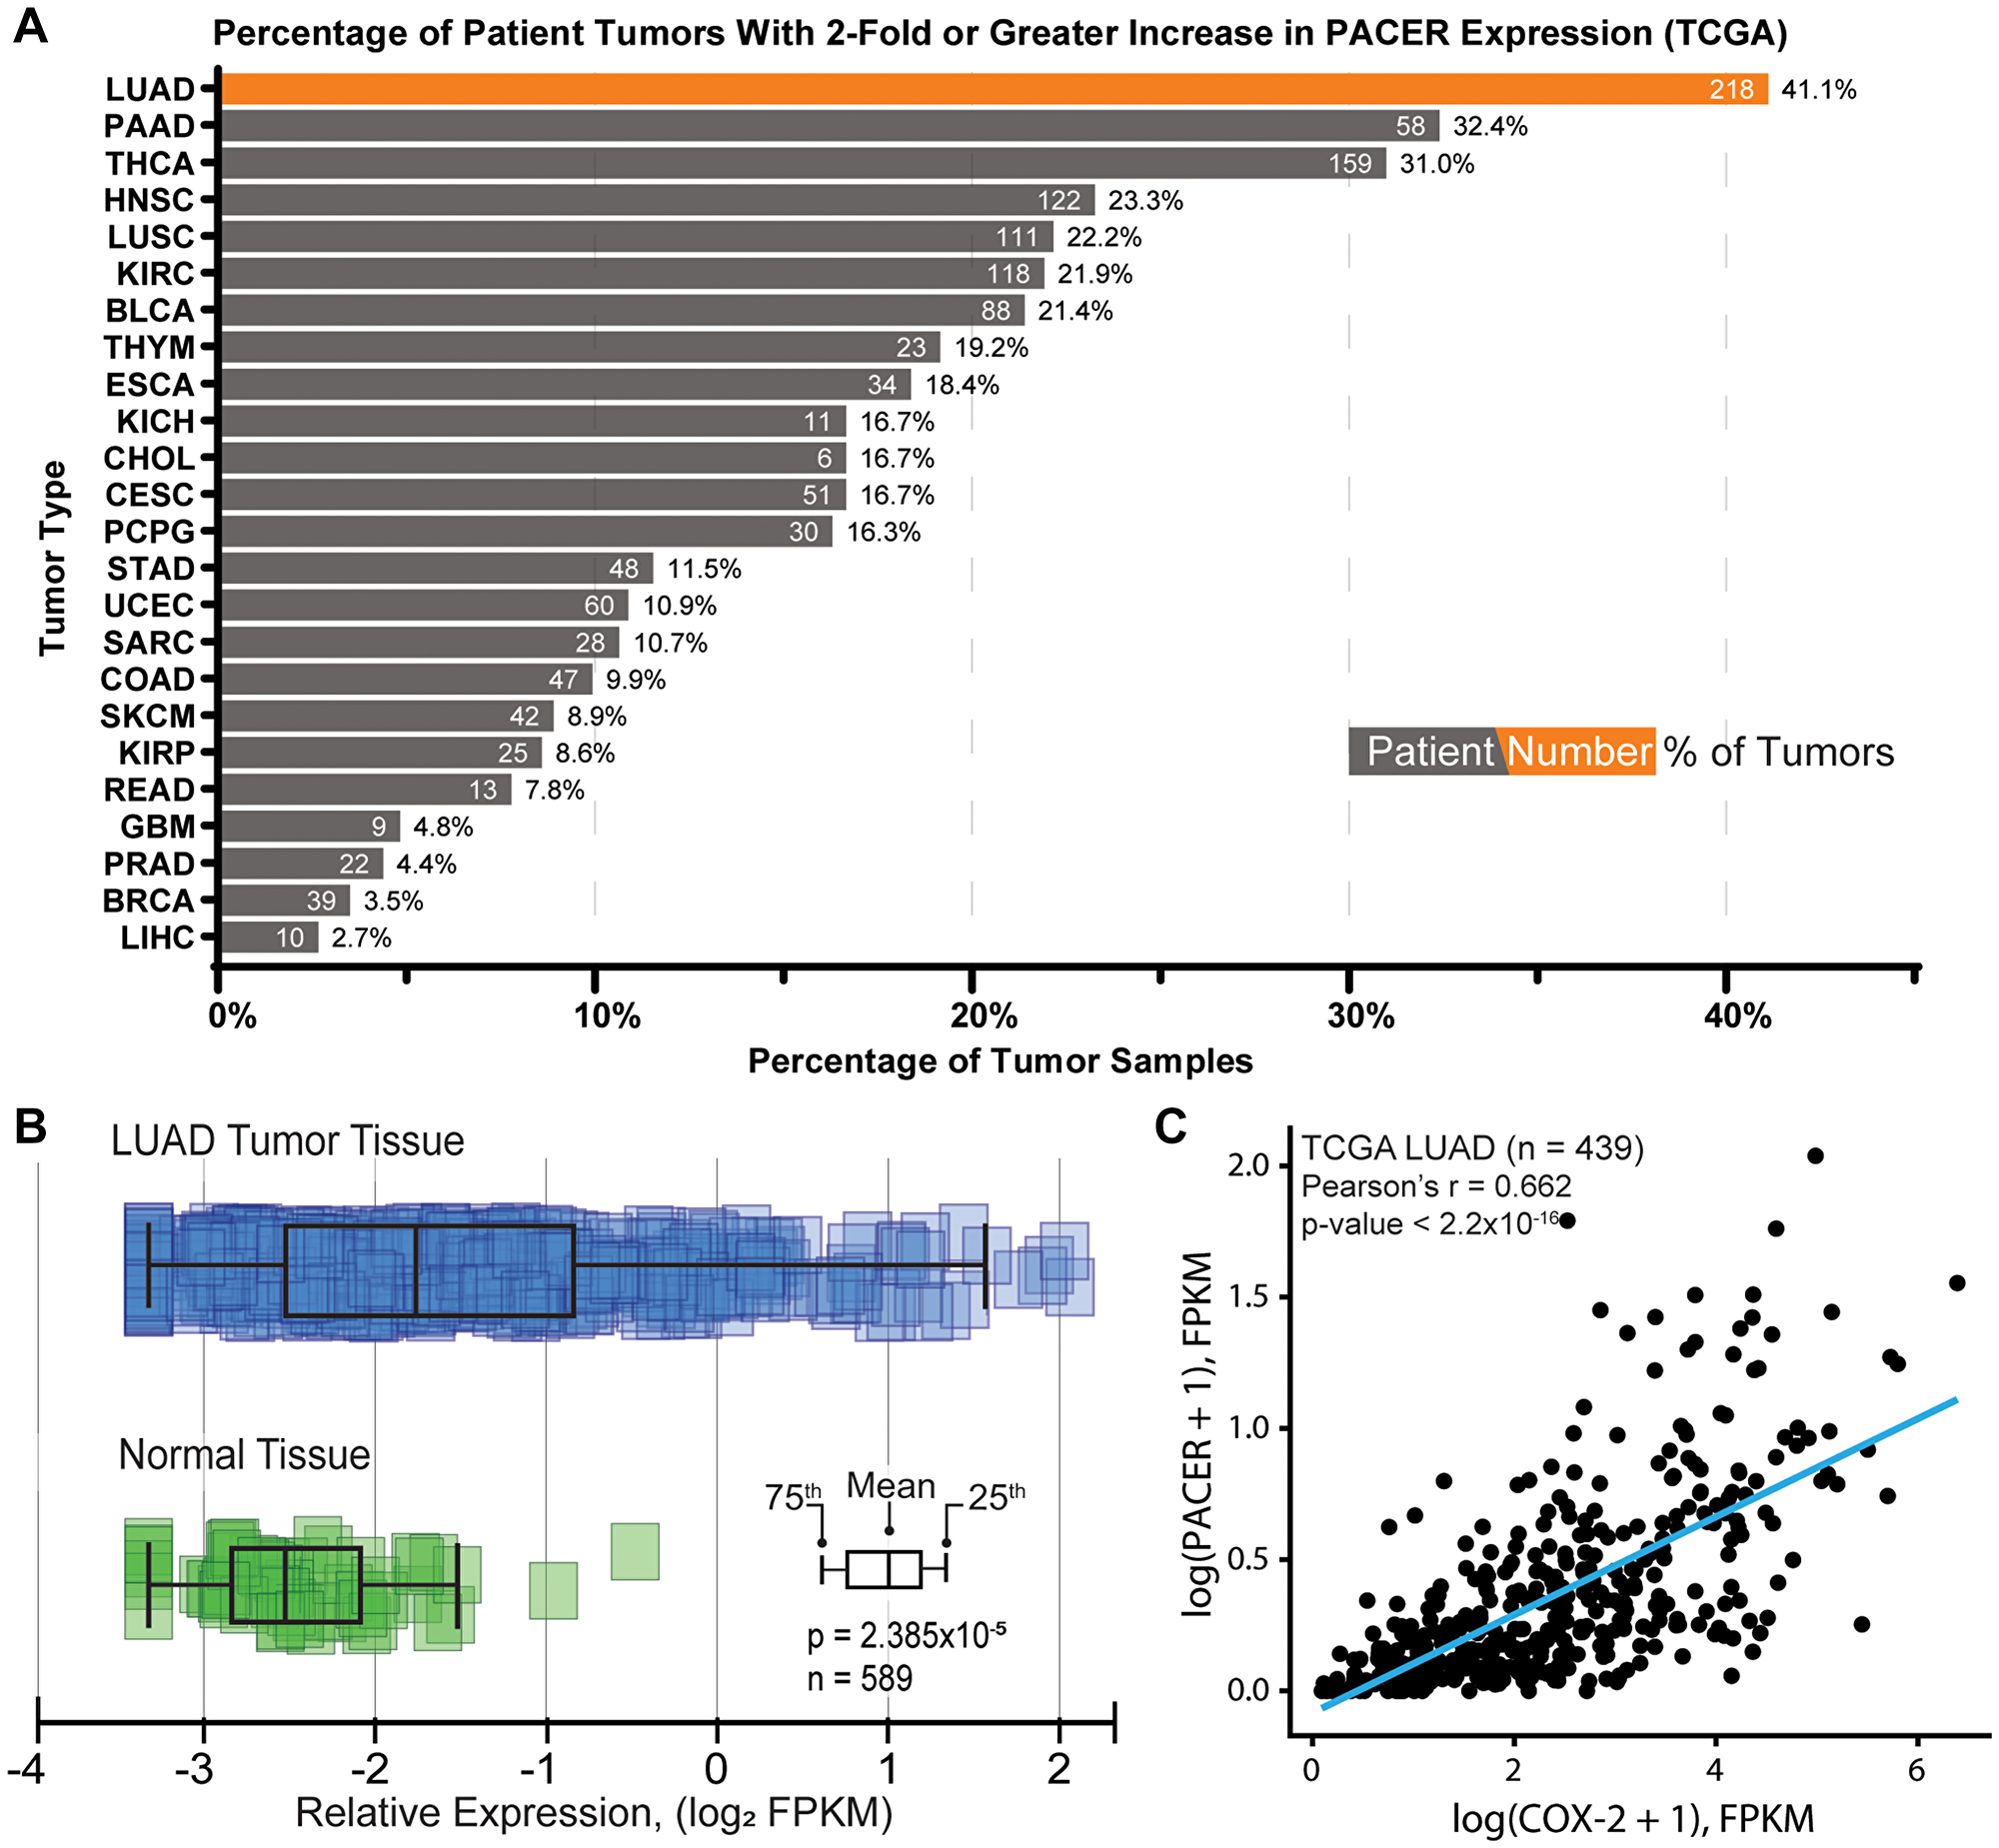 Characterization of PACER expression in lung adenocarcinoma (LUAD) and normal tissue.